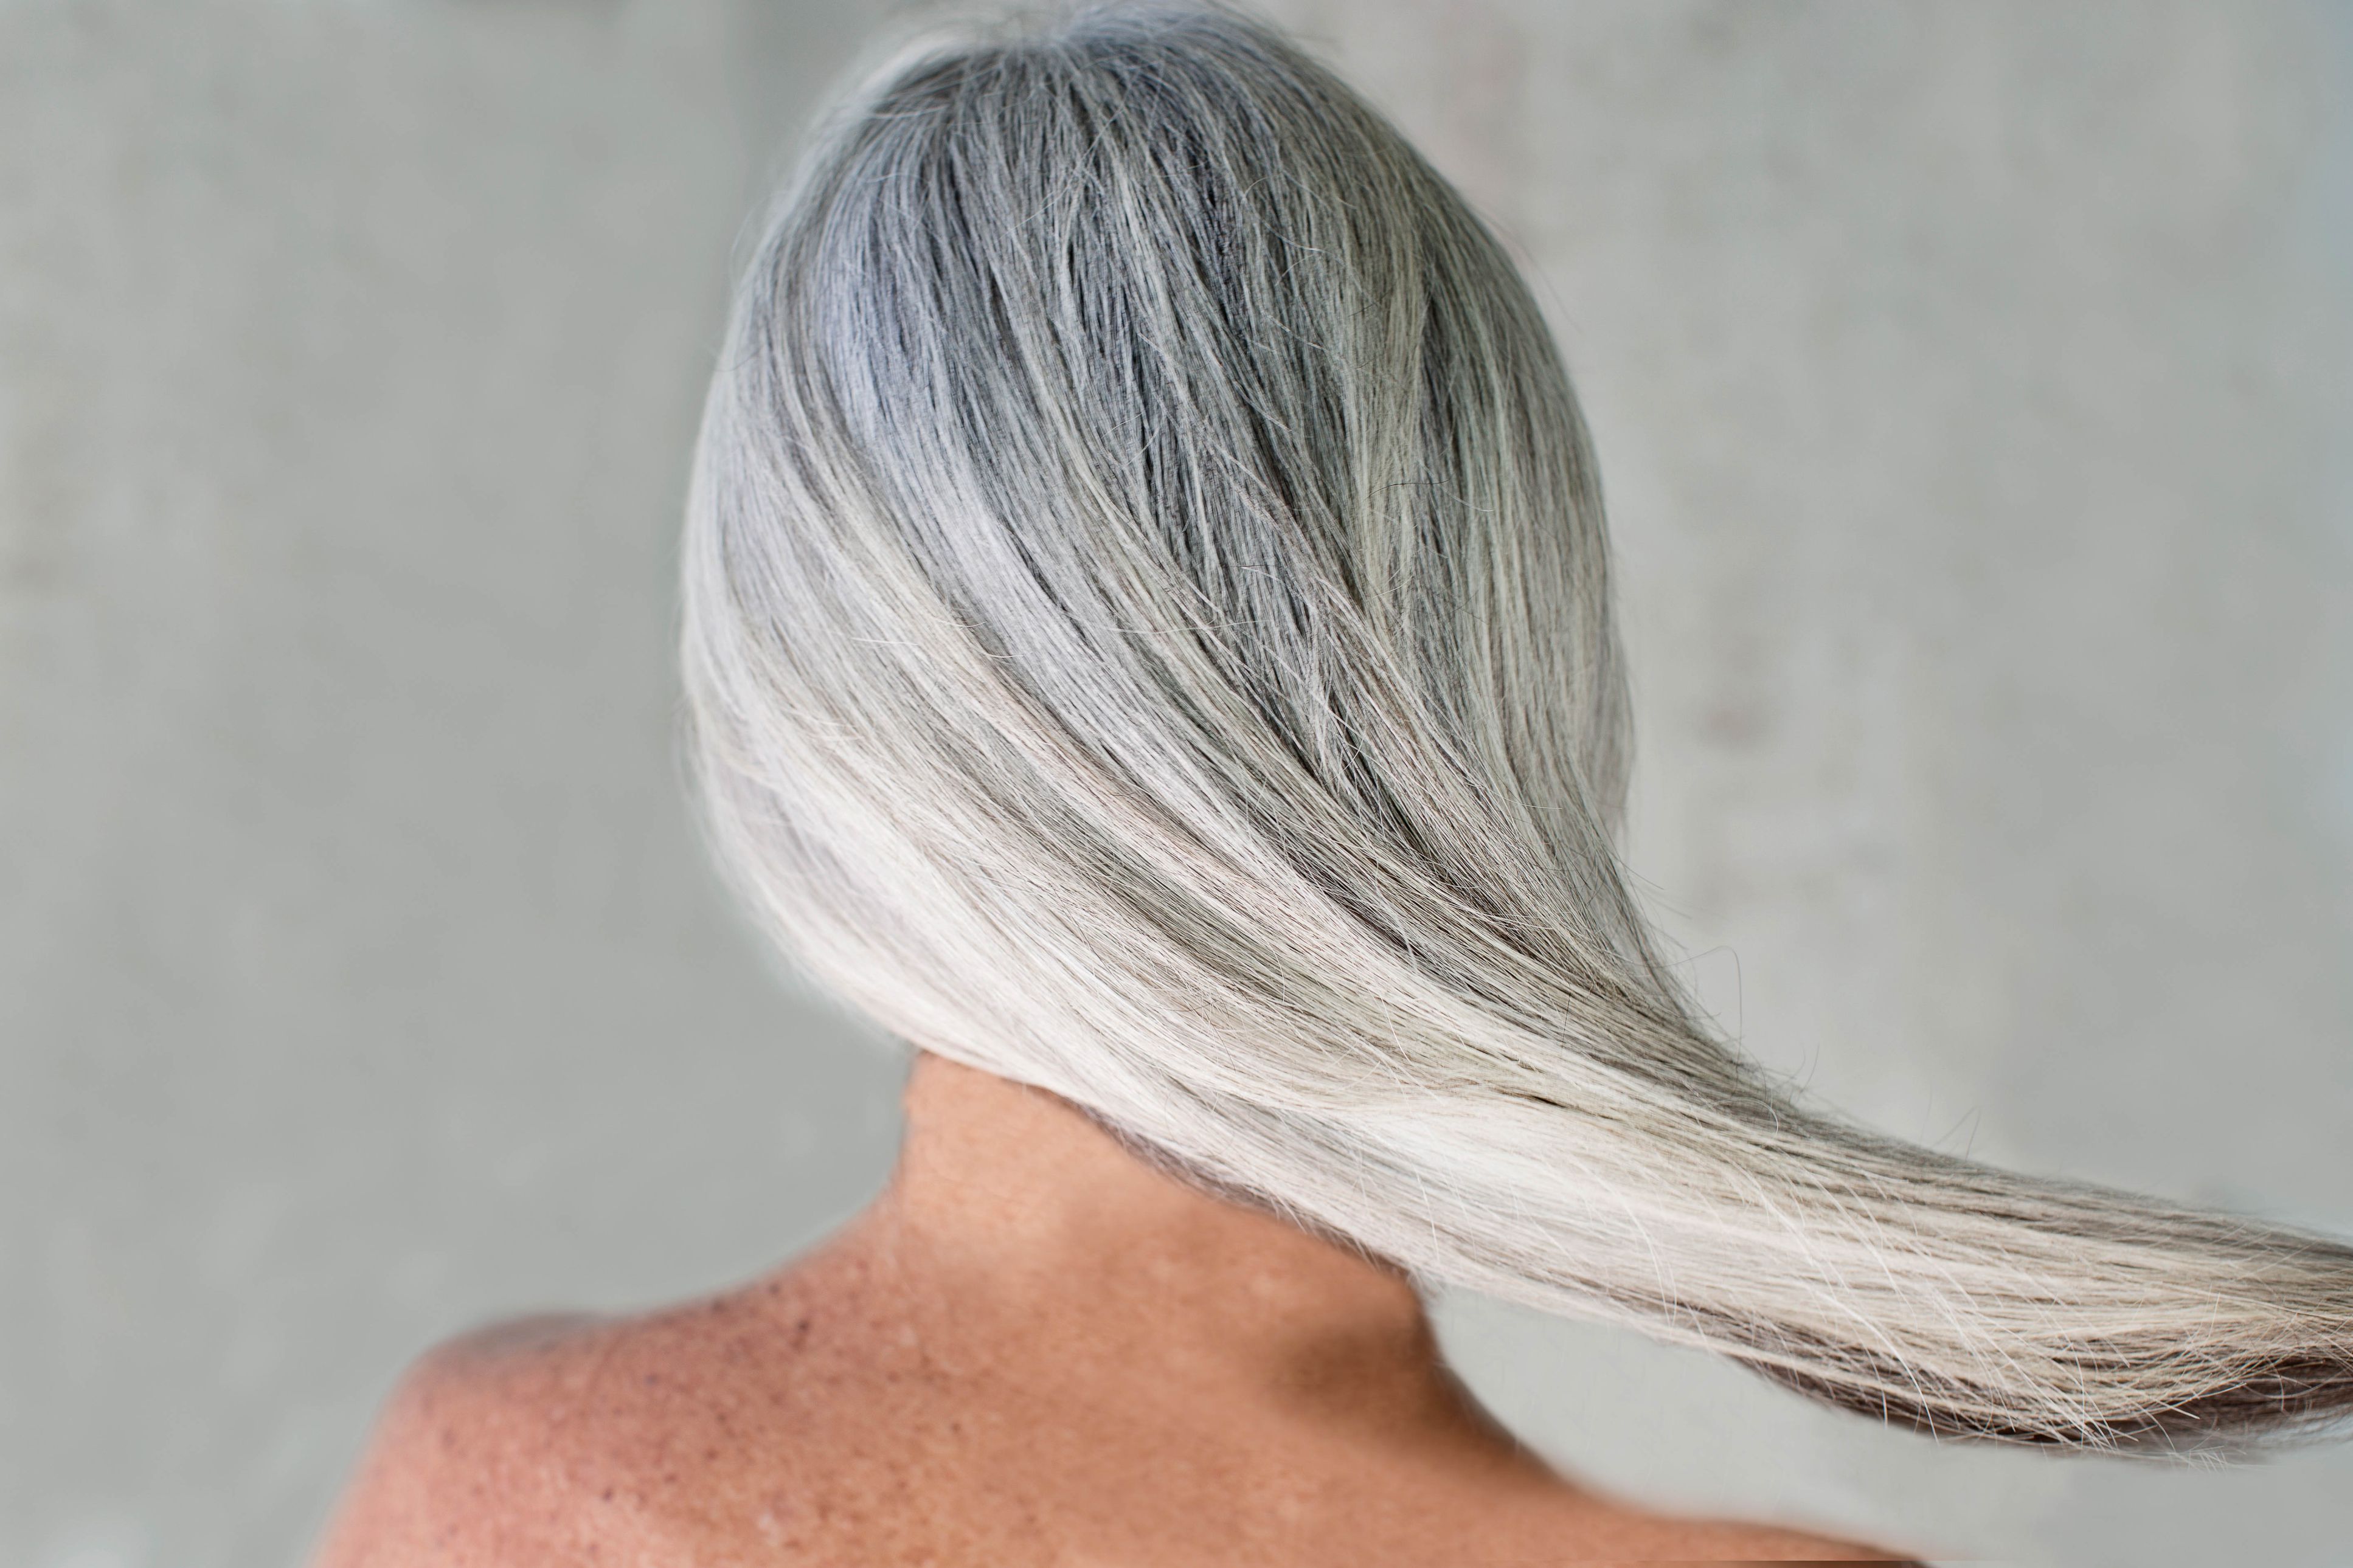 Why Does Hair Turn Gray